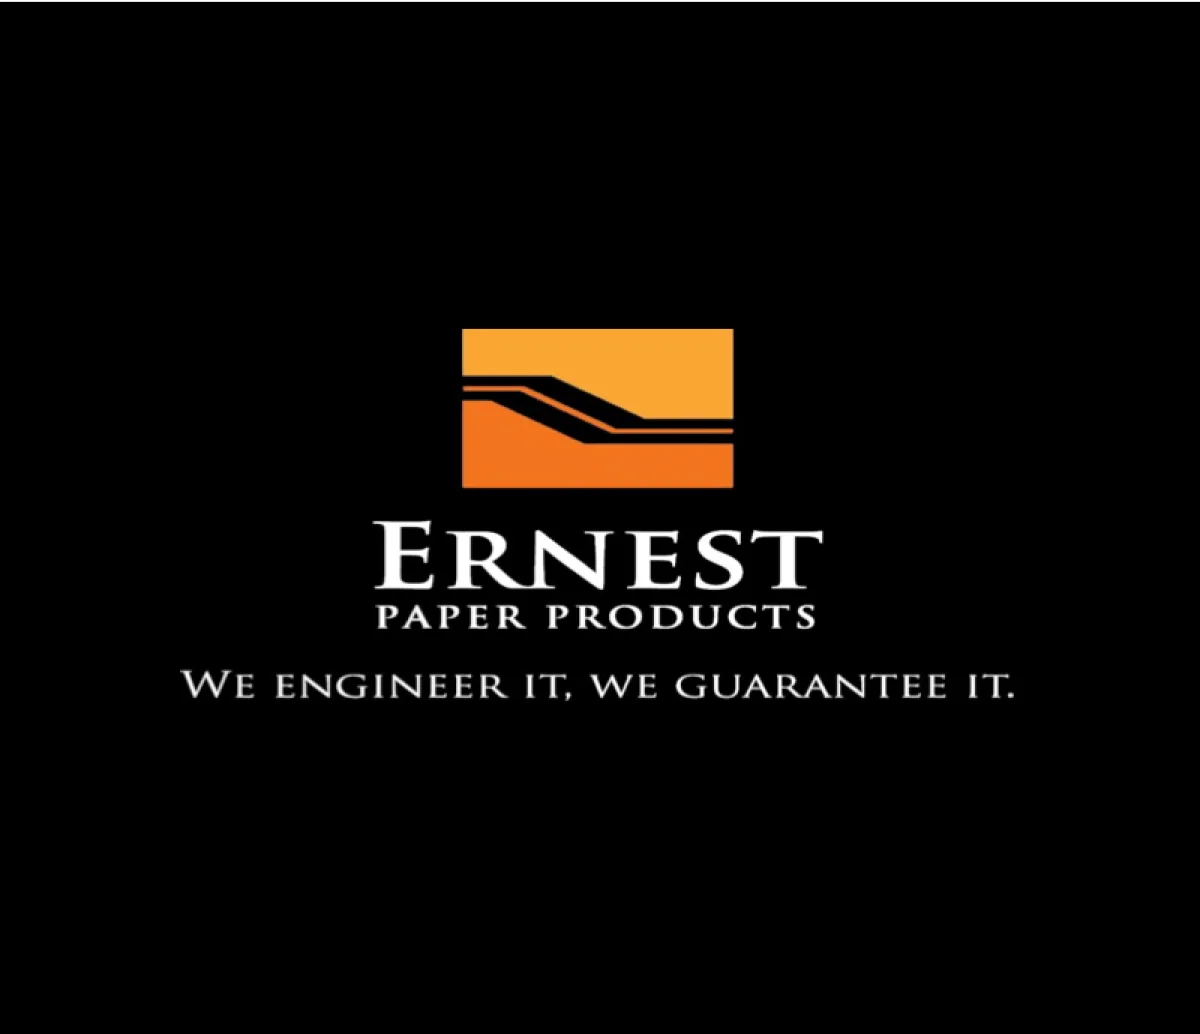 Ernest paper products